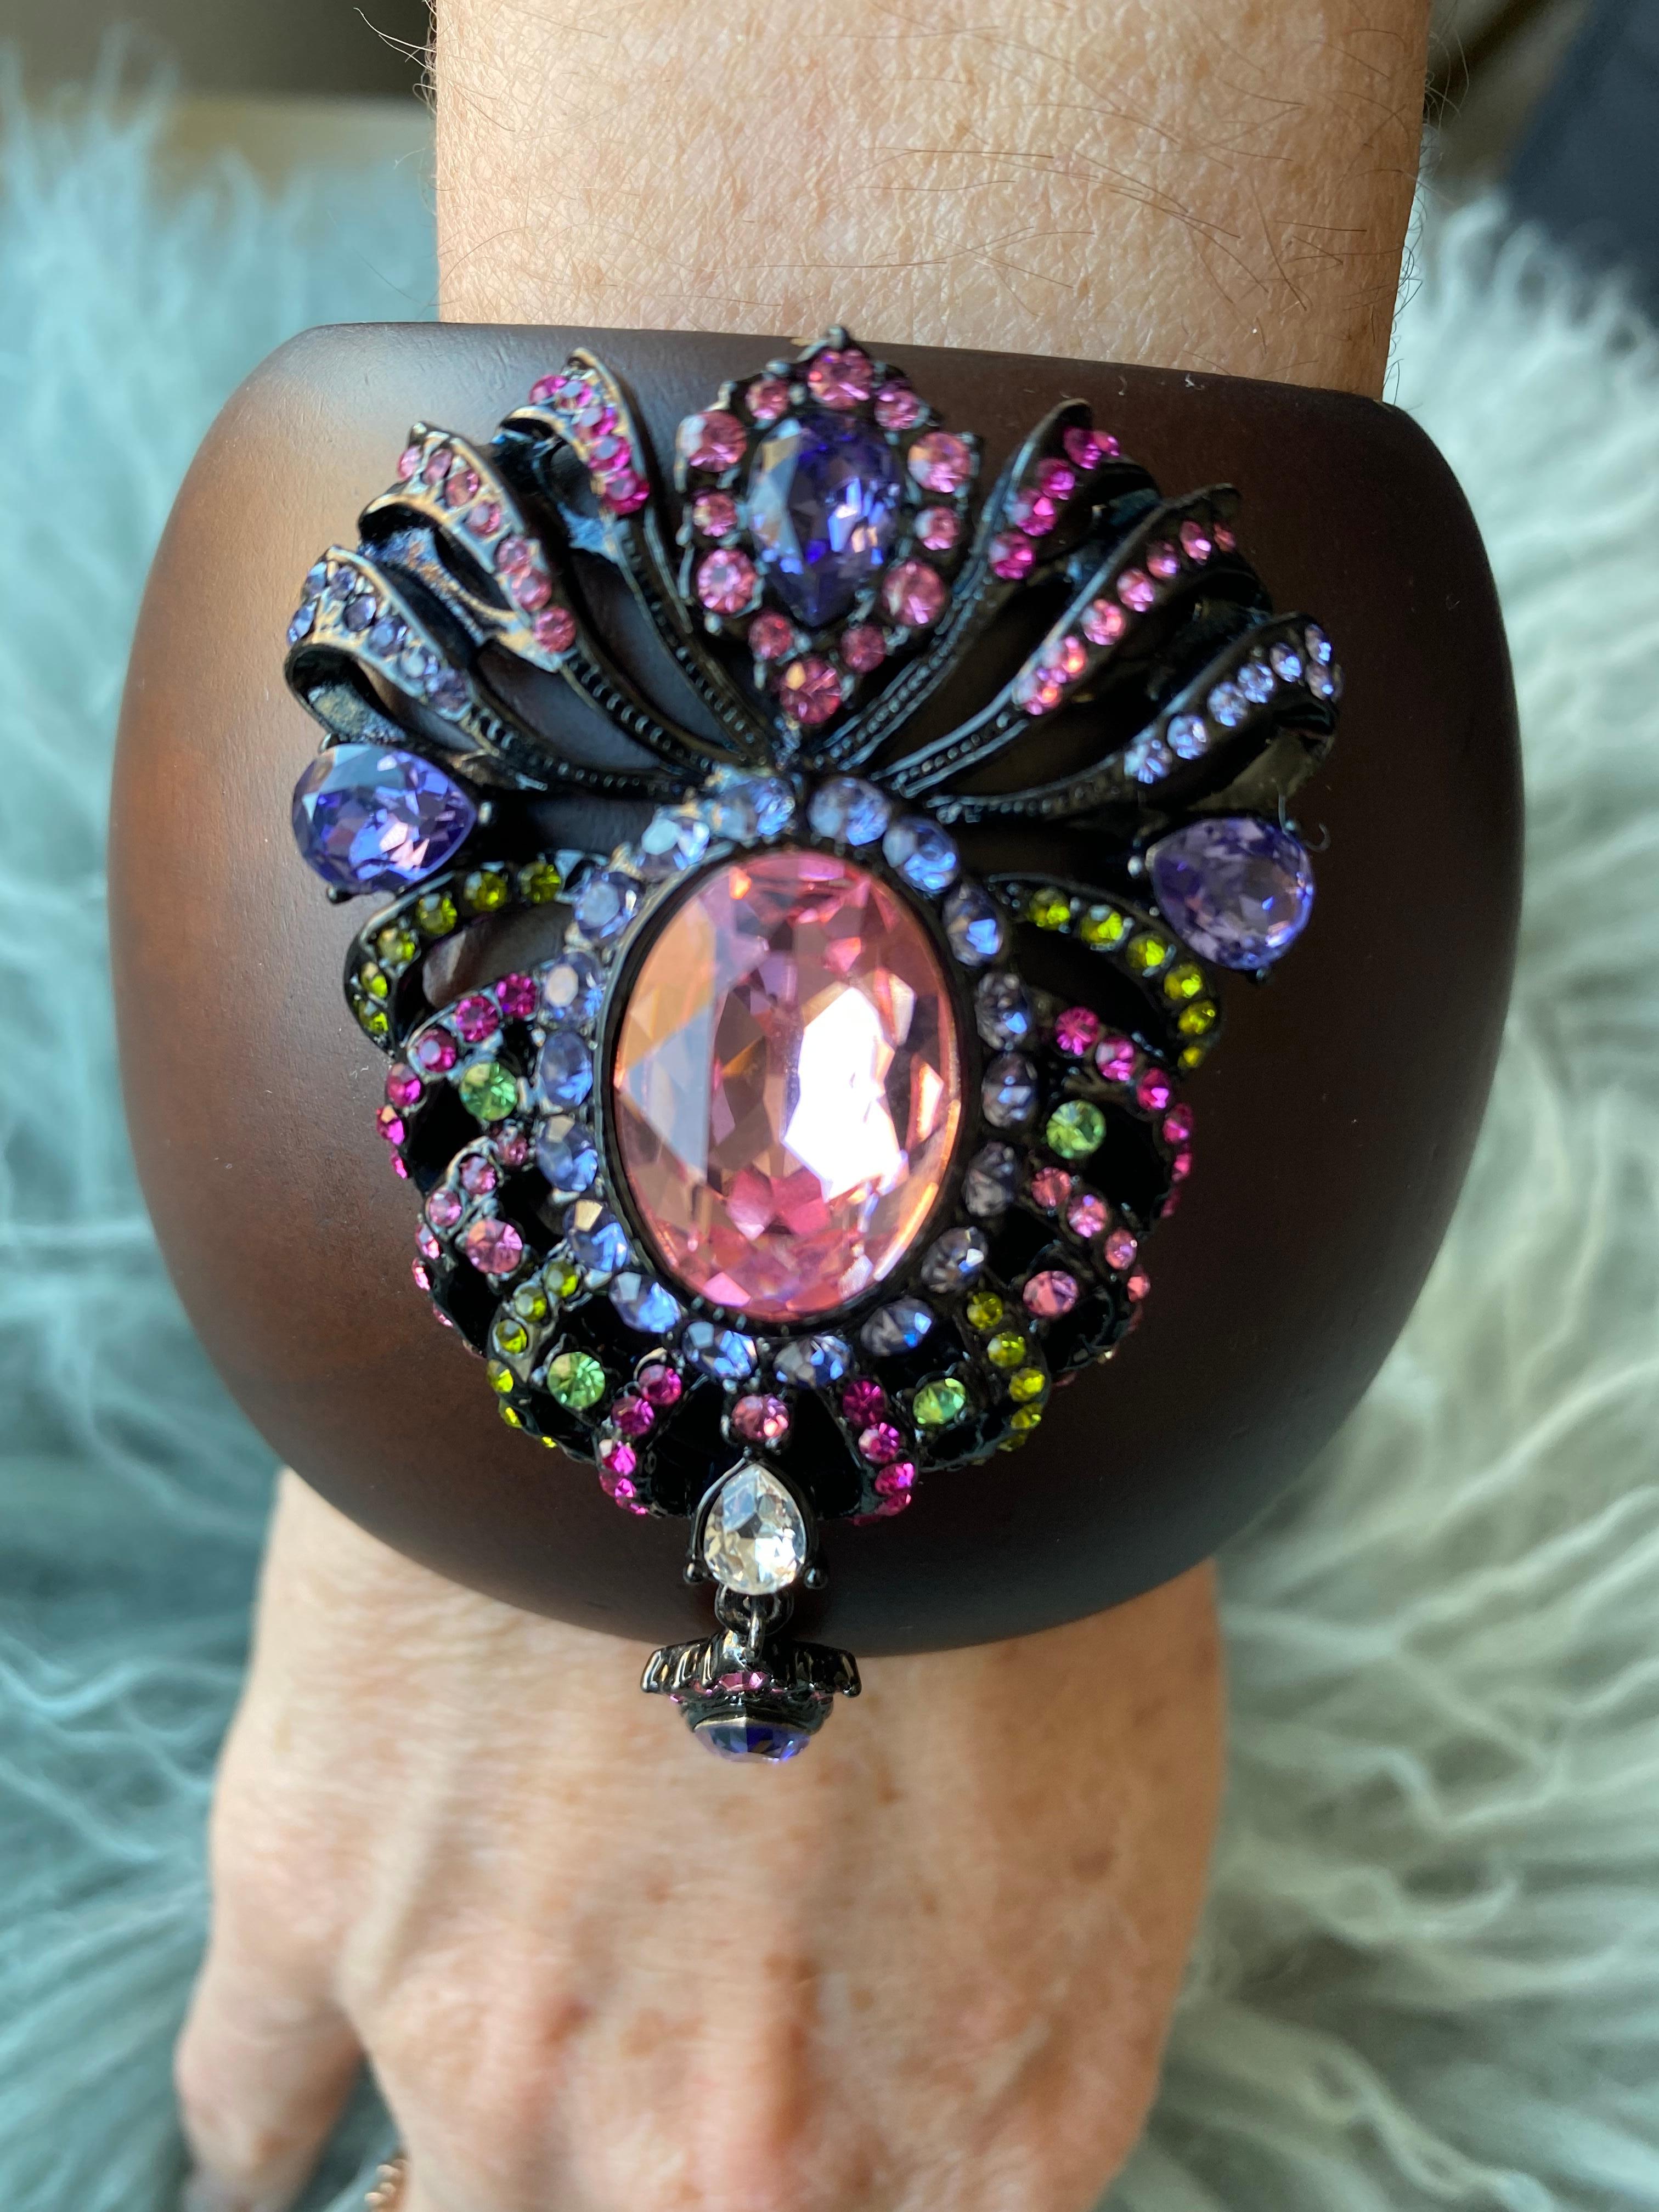 “The Crown Cuff”
Bochic red carpet bijoux jewlery, from the “IKON” private collection. 
The color purple ties the royals to ancient times.
Here we have all the royal colors in one Indian crown motif, rubies red, purples, peridot greens, pinks and a